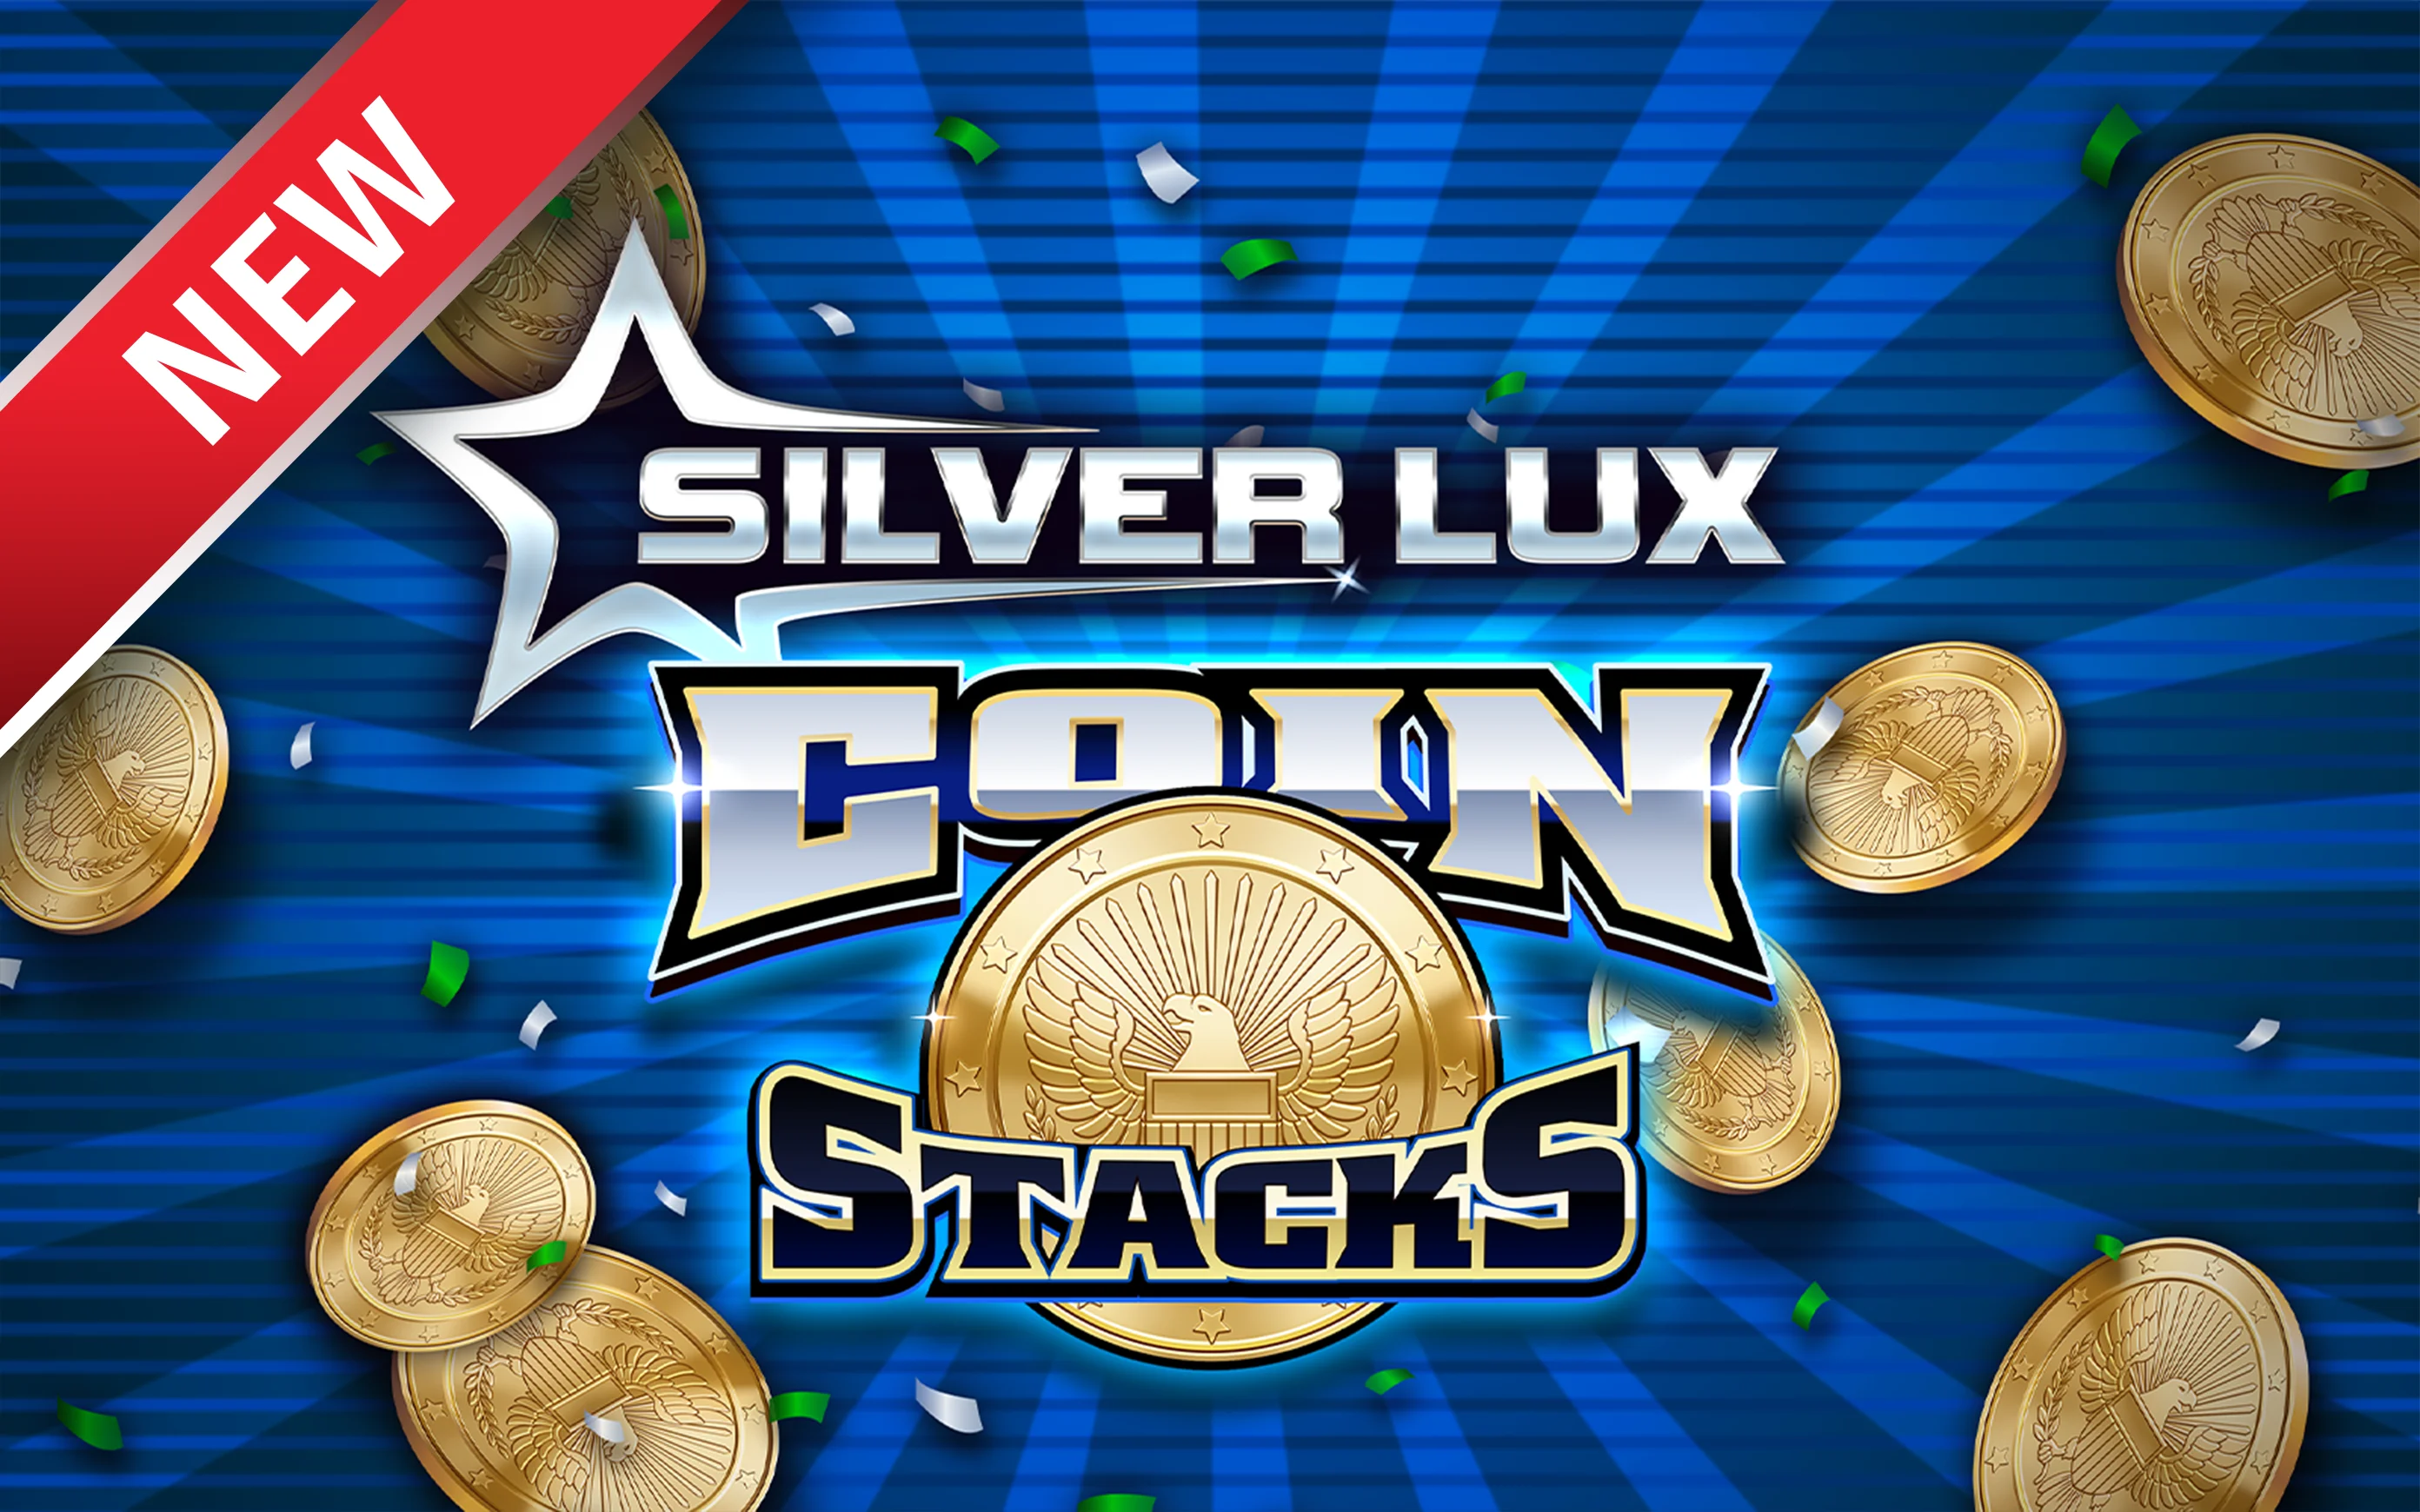 Play Silver Lux – Coin Stacks on Starcasino.be online casino